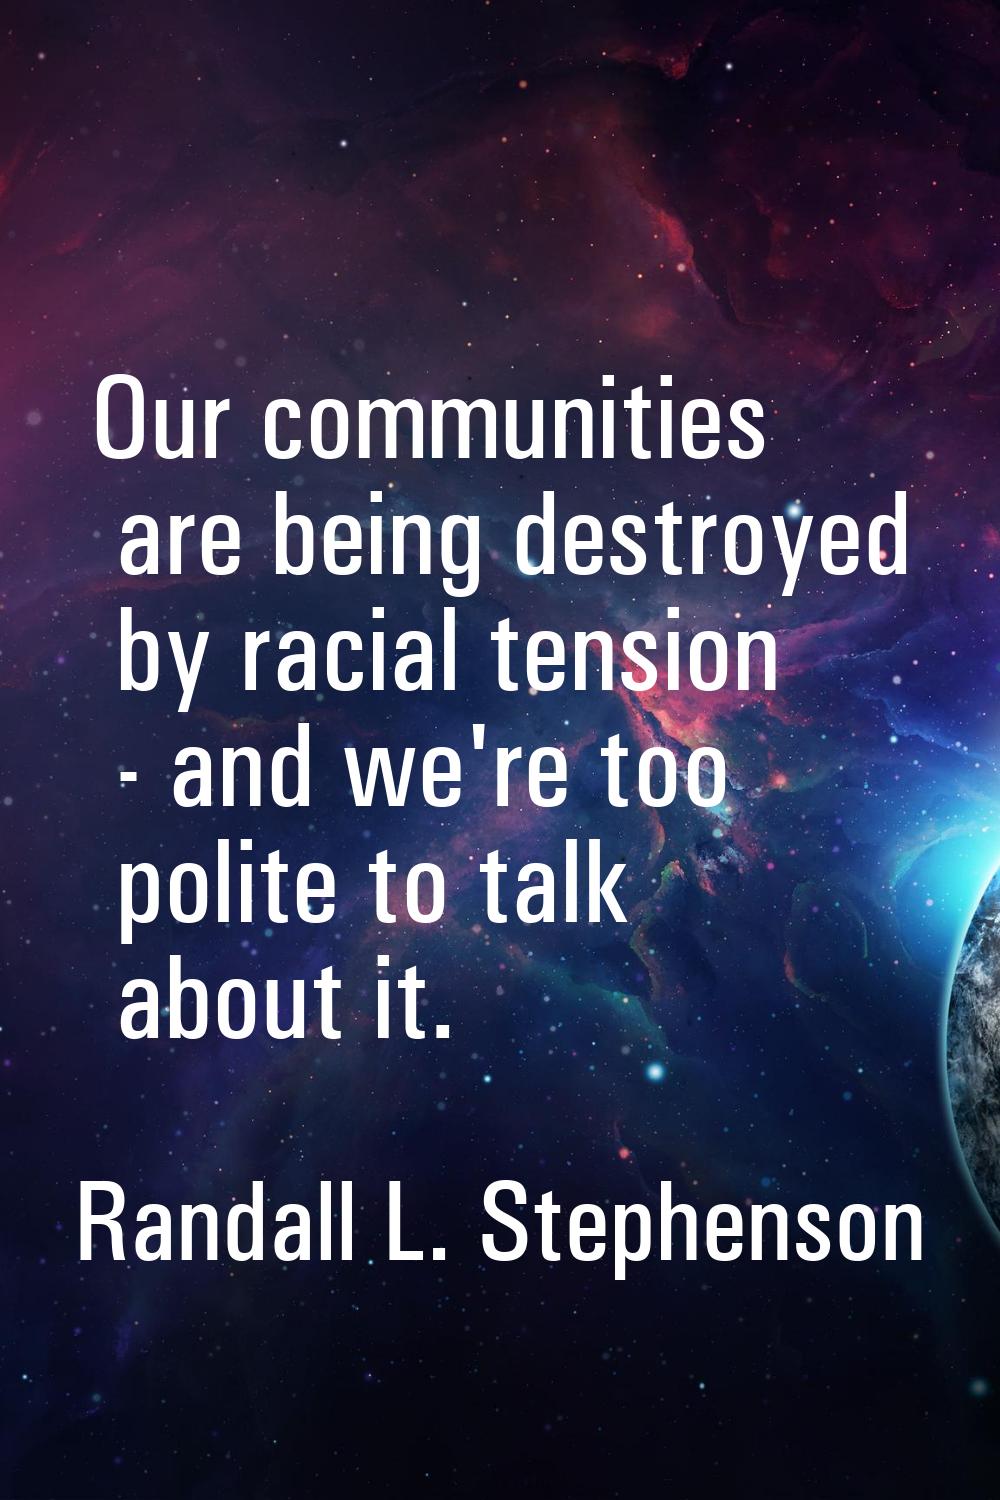 Our communities are being destroyed by racial tension - and we're too polite to talk about it.